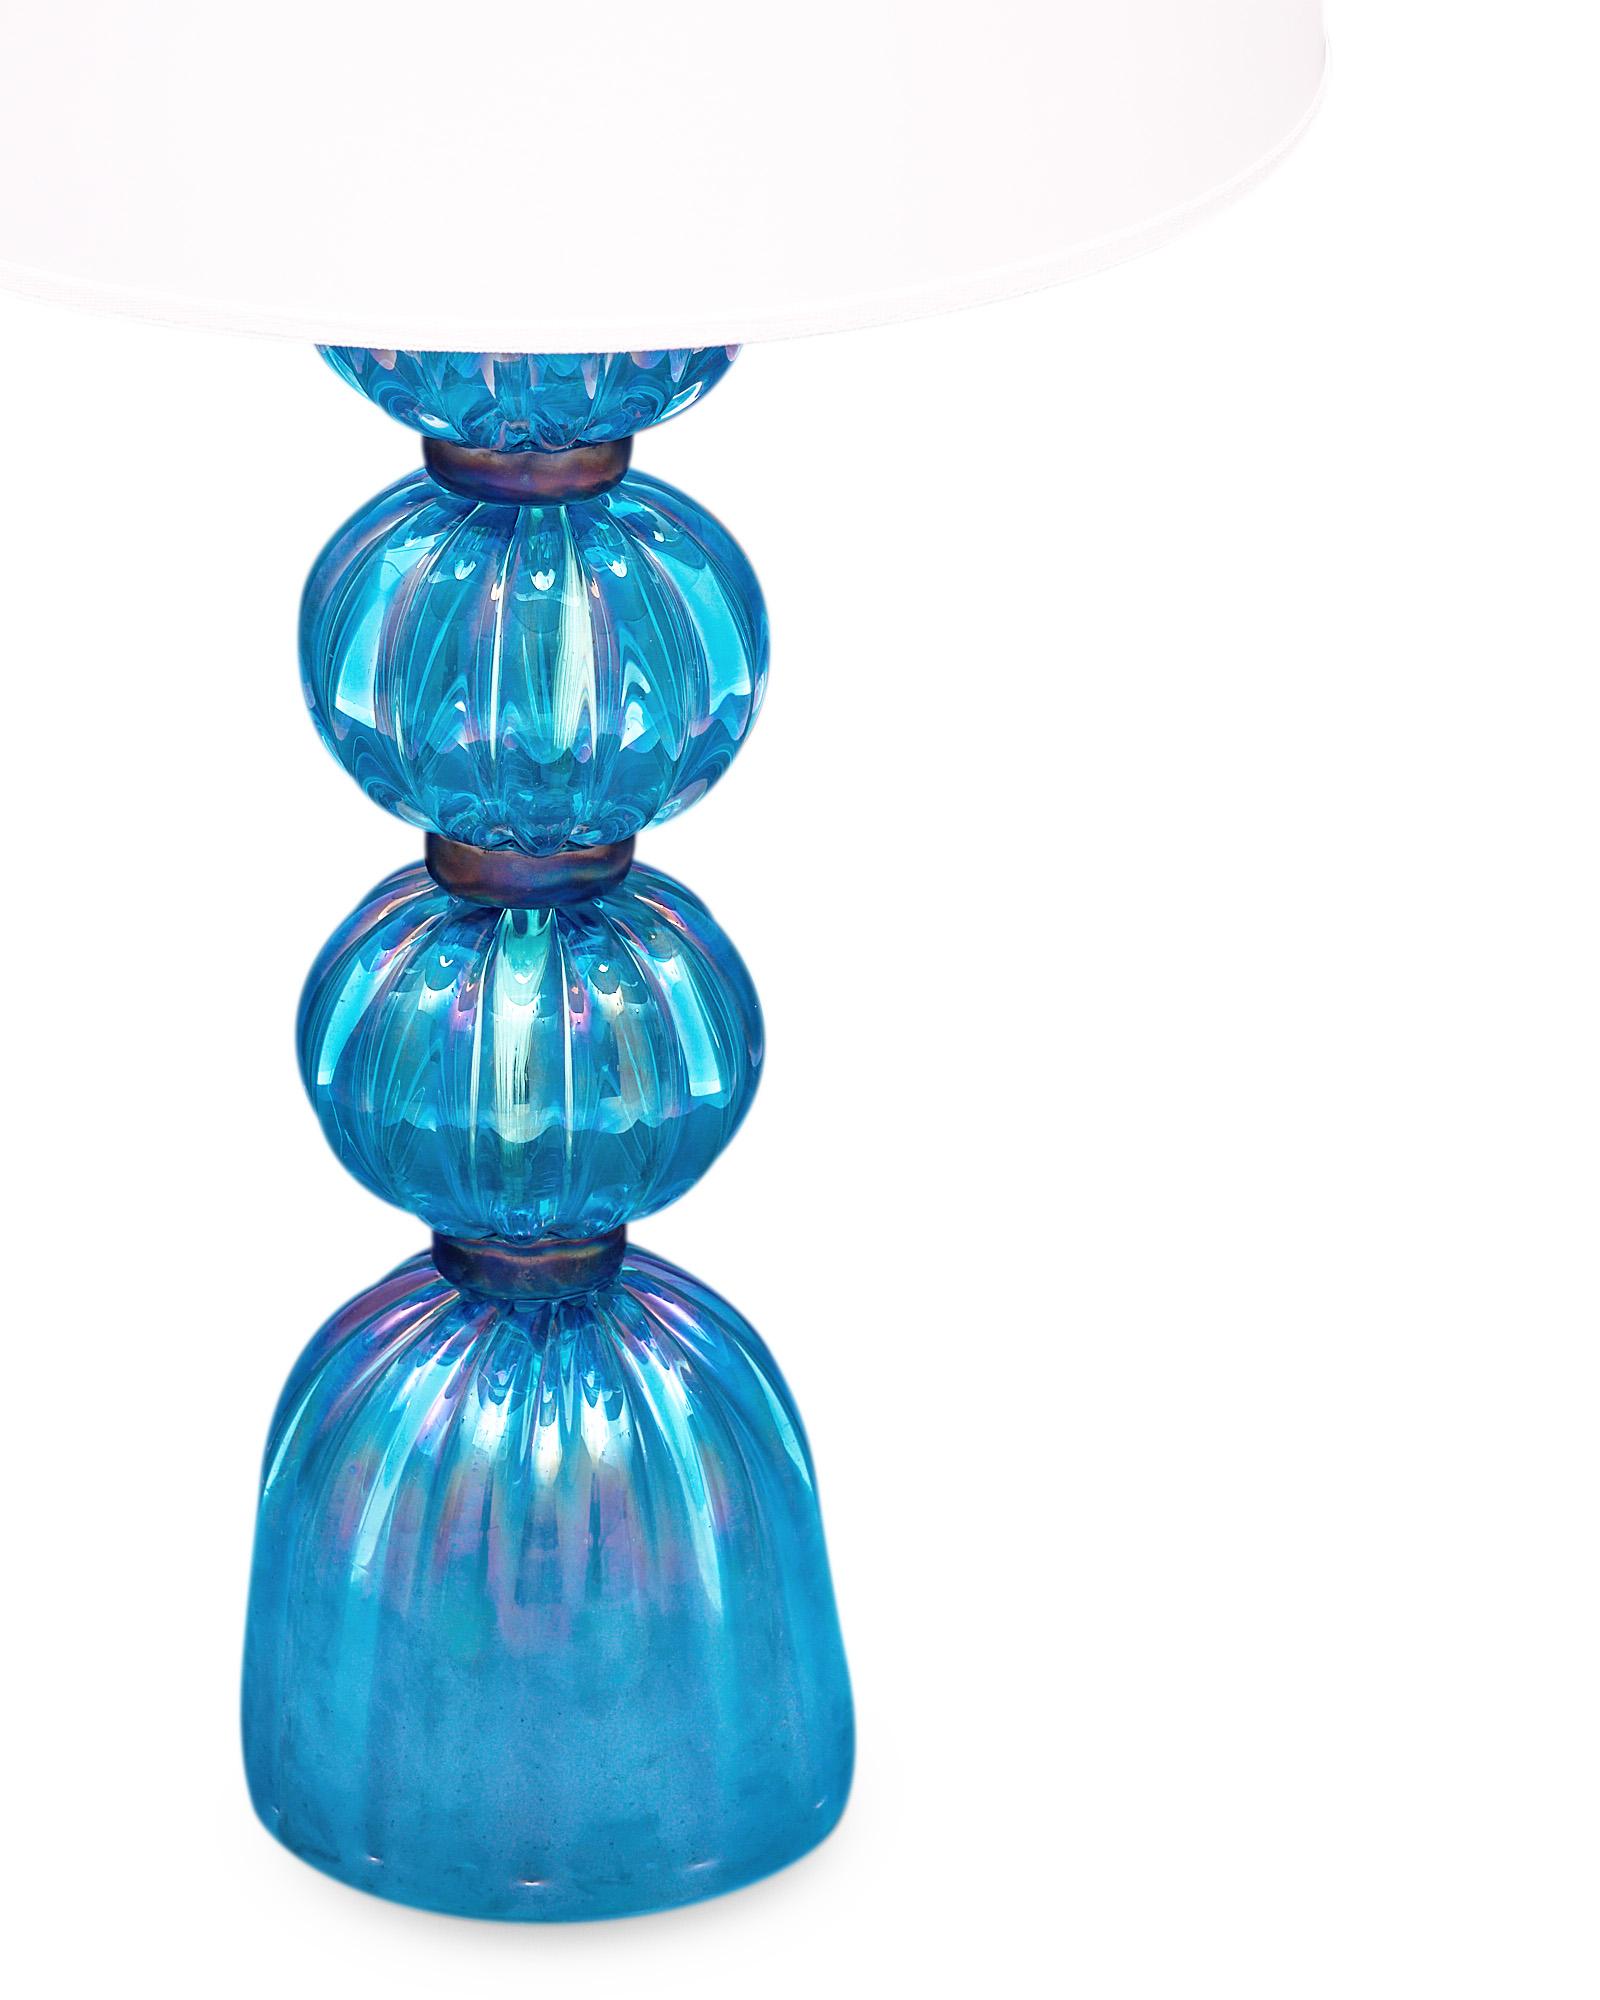 Pair of lamps from Murano, Italy made of hand-blown blue iridescent colored glass. They have been newly wired to fit US standards.